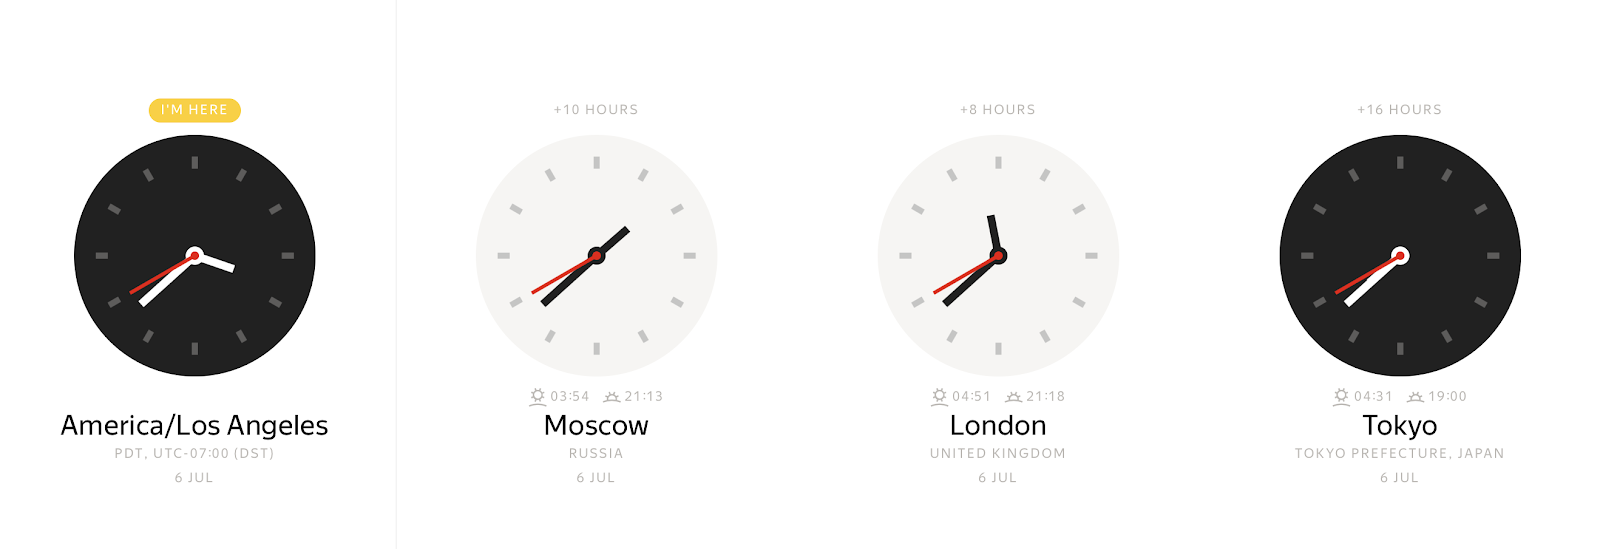 A set of wall clocks, for example, can represent many different time instants. The time zone offset feature in Apache Spark 3.0 allows us to unambiguously bind a local timestamp to a time instant.